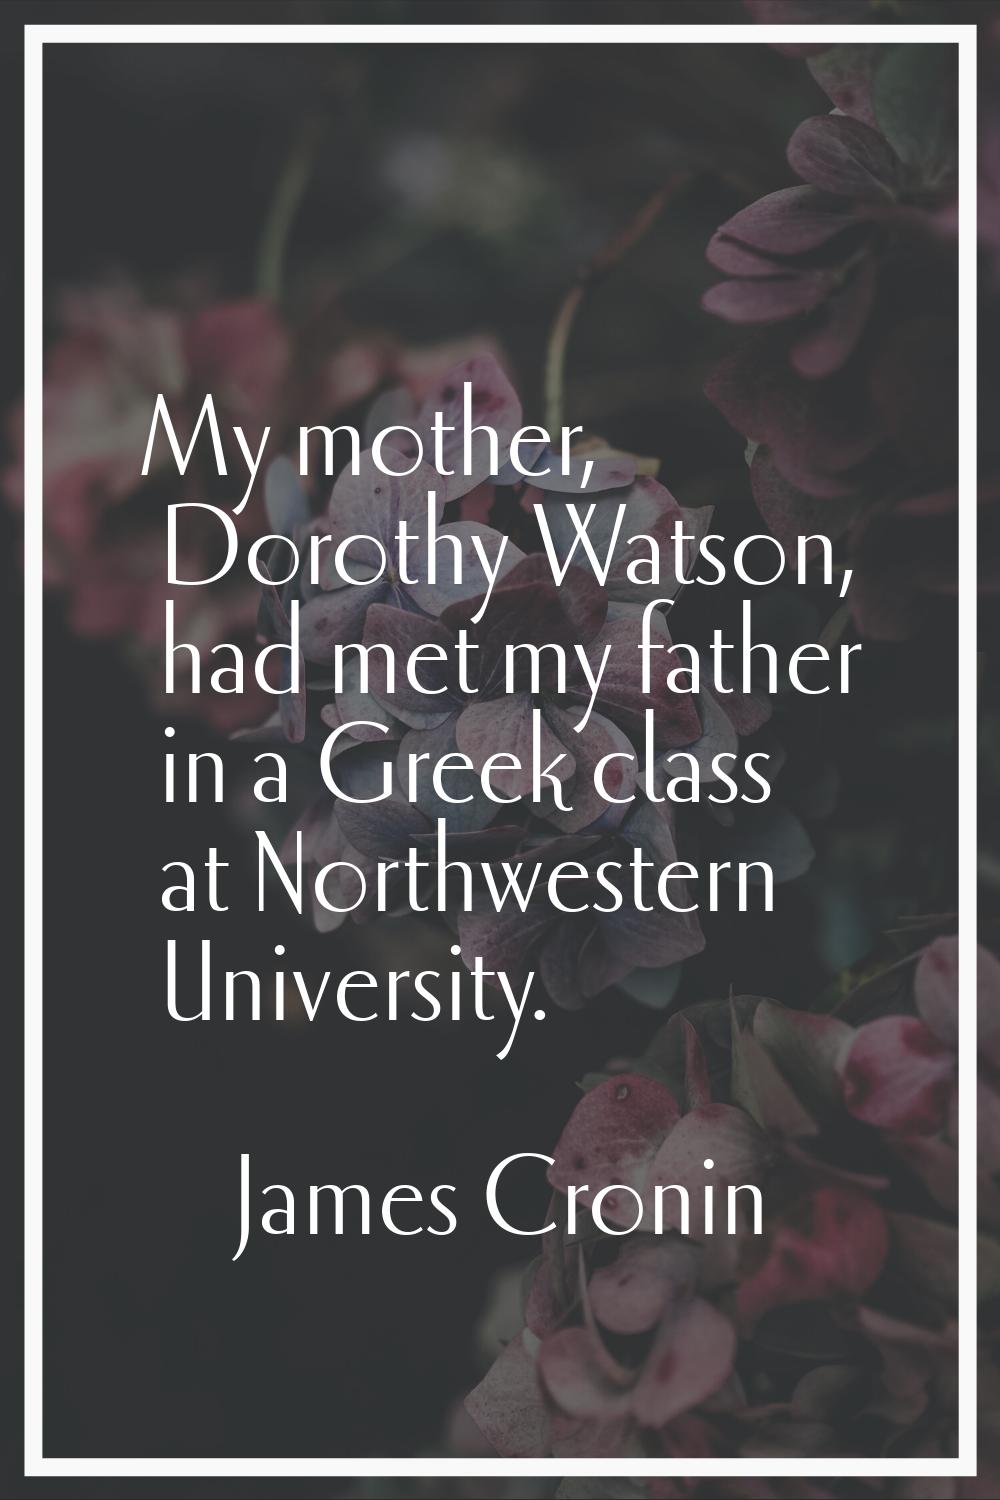 My mother, Dorothy Watson, had met my father in a Greek class at Northwestern University.